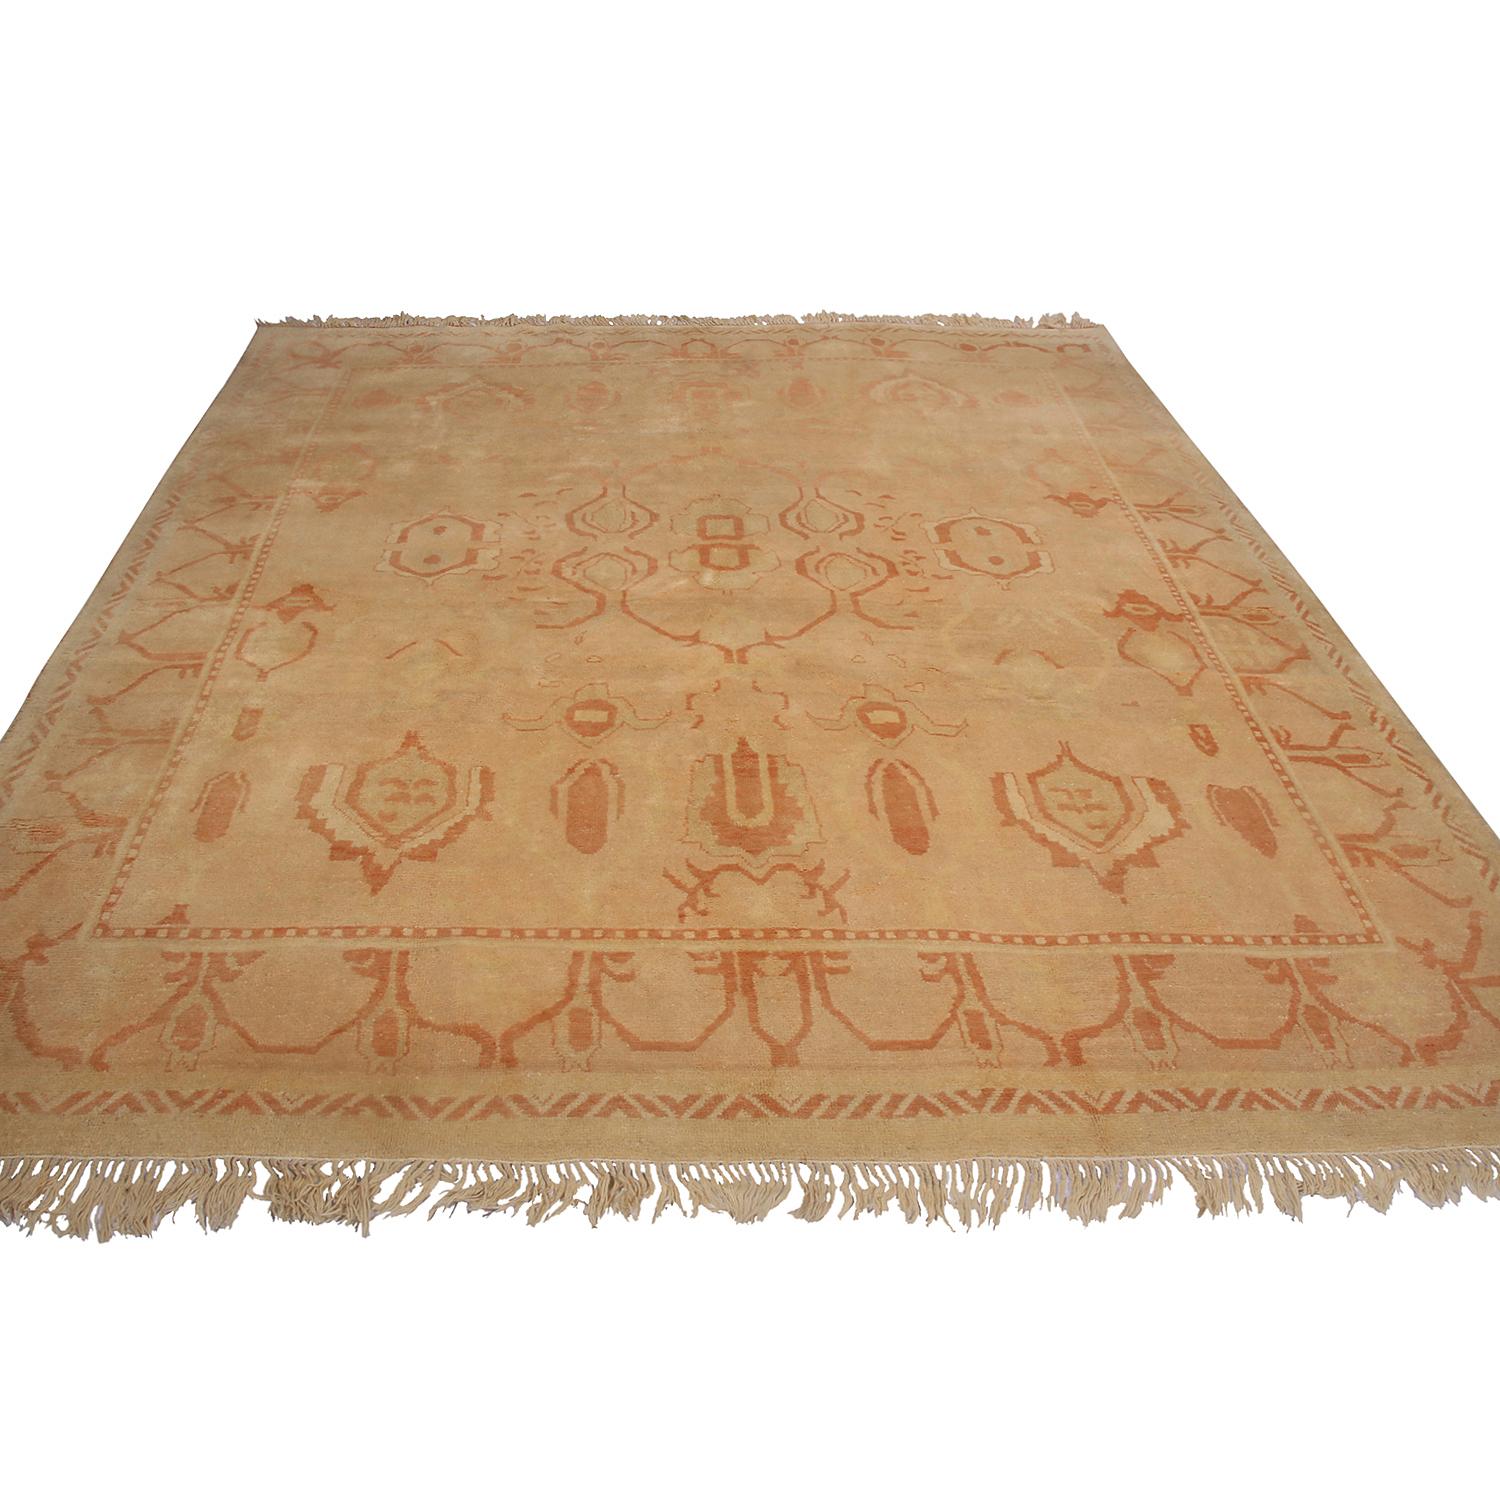 Hand knotted in Turkey originating between 1950-1960, this vintage midcentury Oushak rug enjoys a warm, inviting colorway complementing a very mild, natural wear in the field. The radiant beige and peach-orange tones play beautifully off the subtly